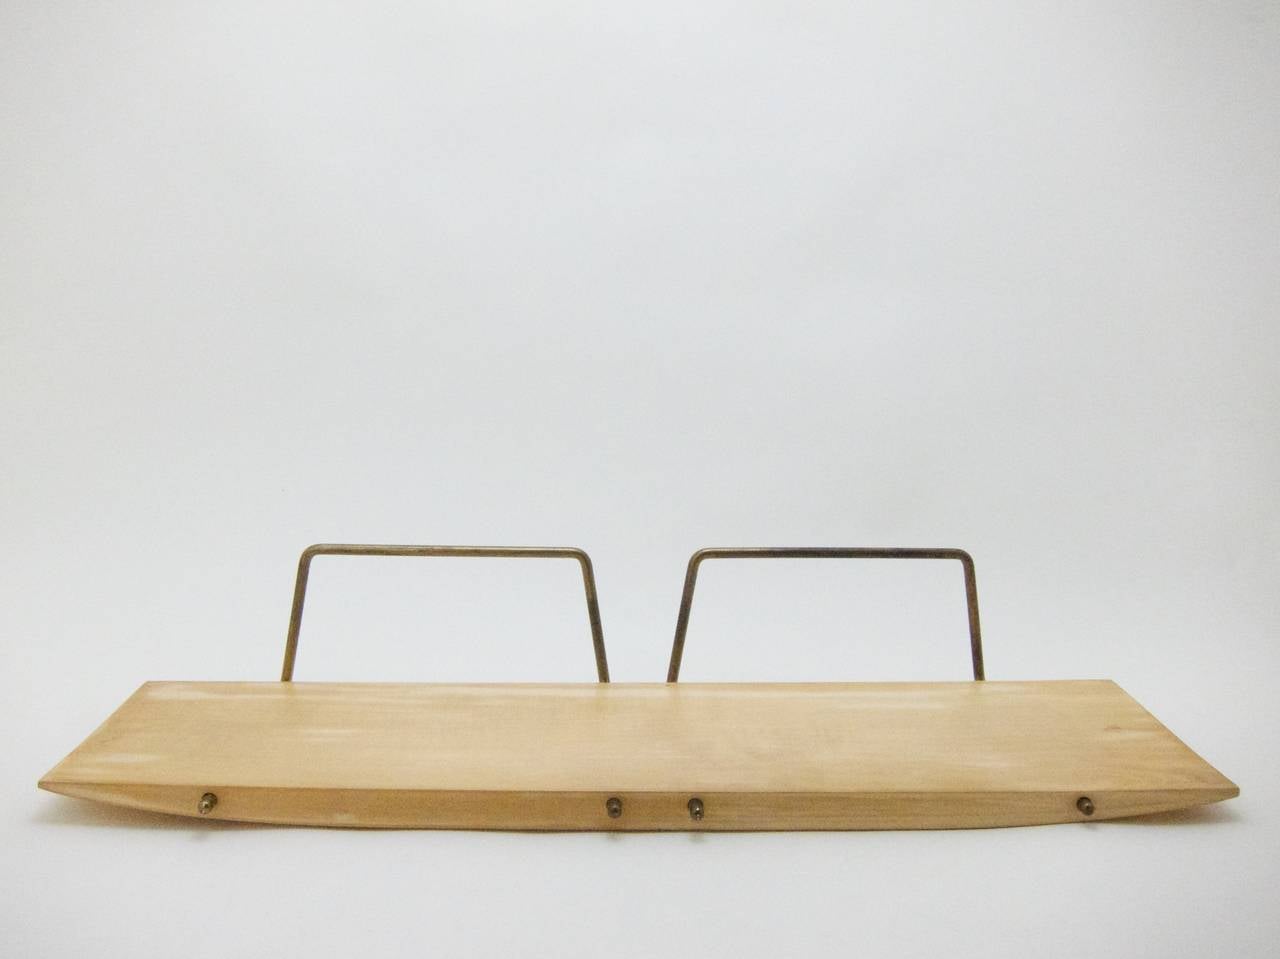 wooden Shelf by Carl Auböck
with 2 brass frames and the original hooks